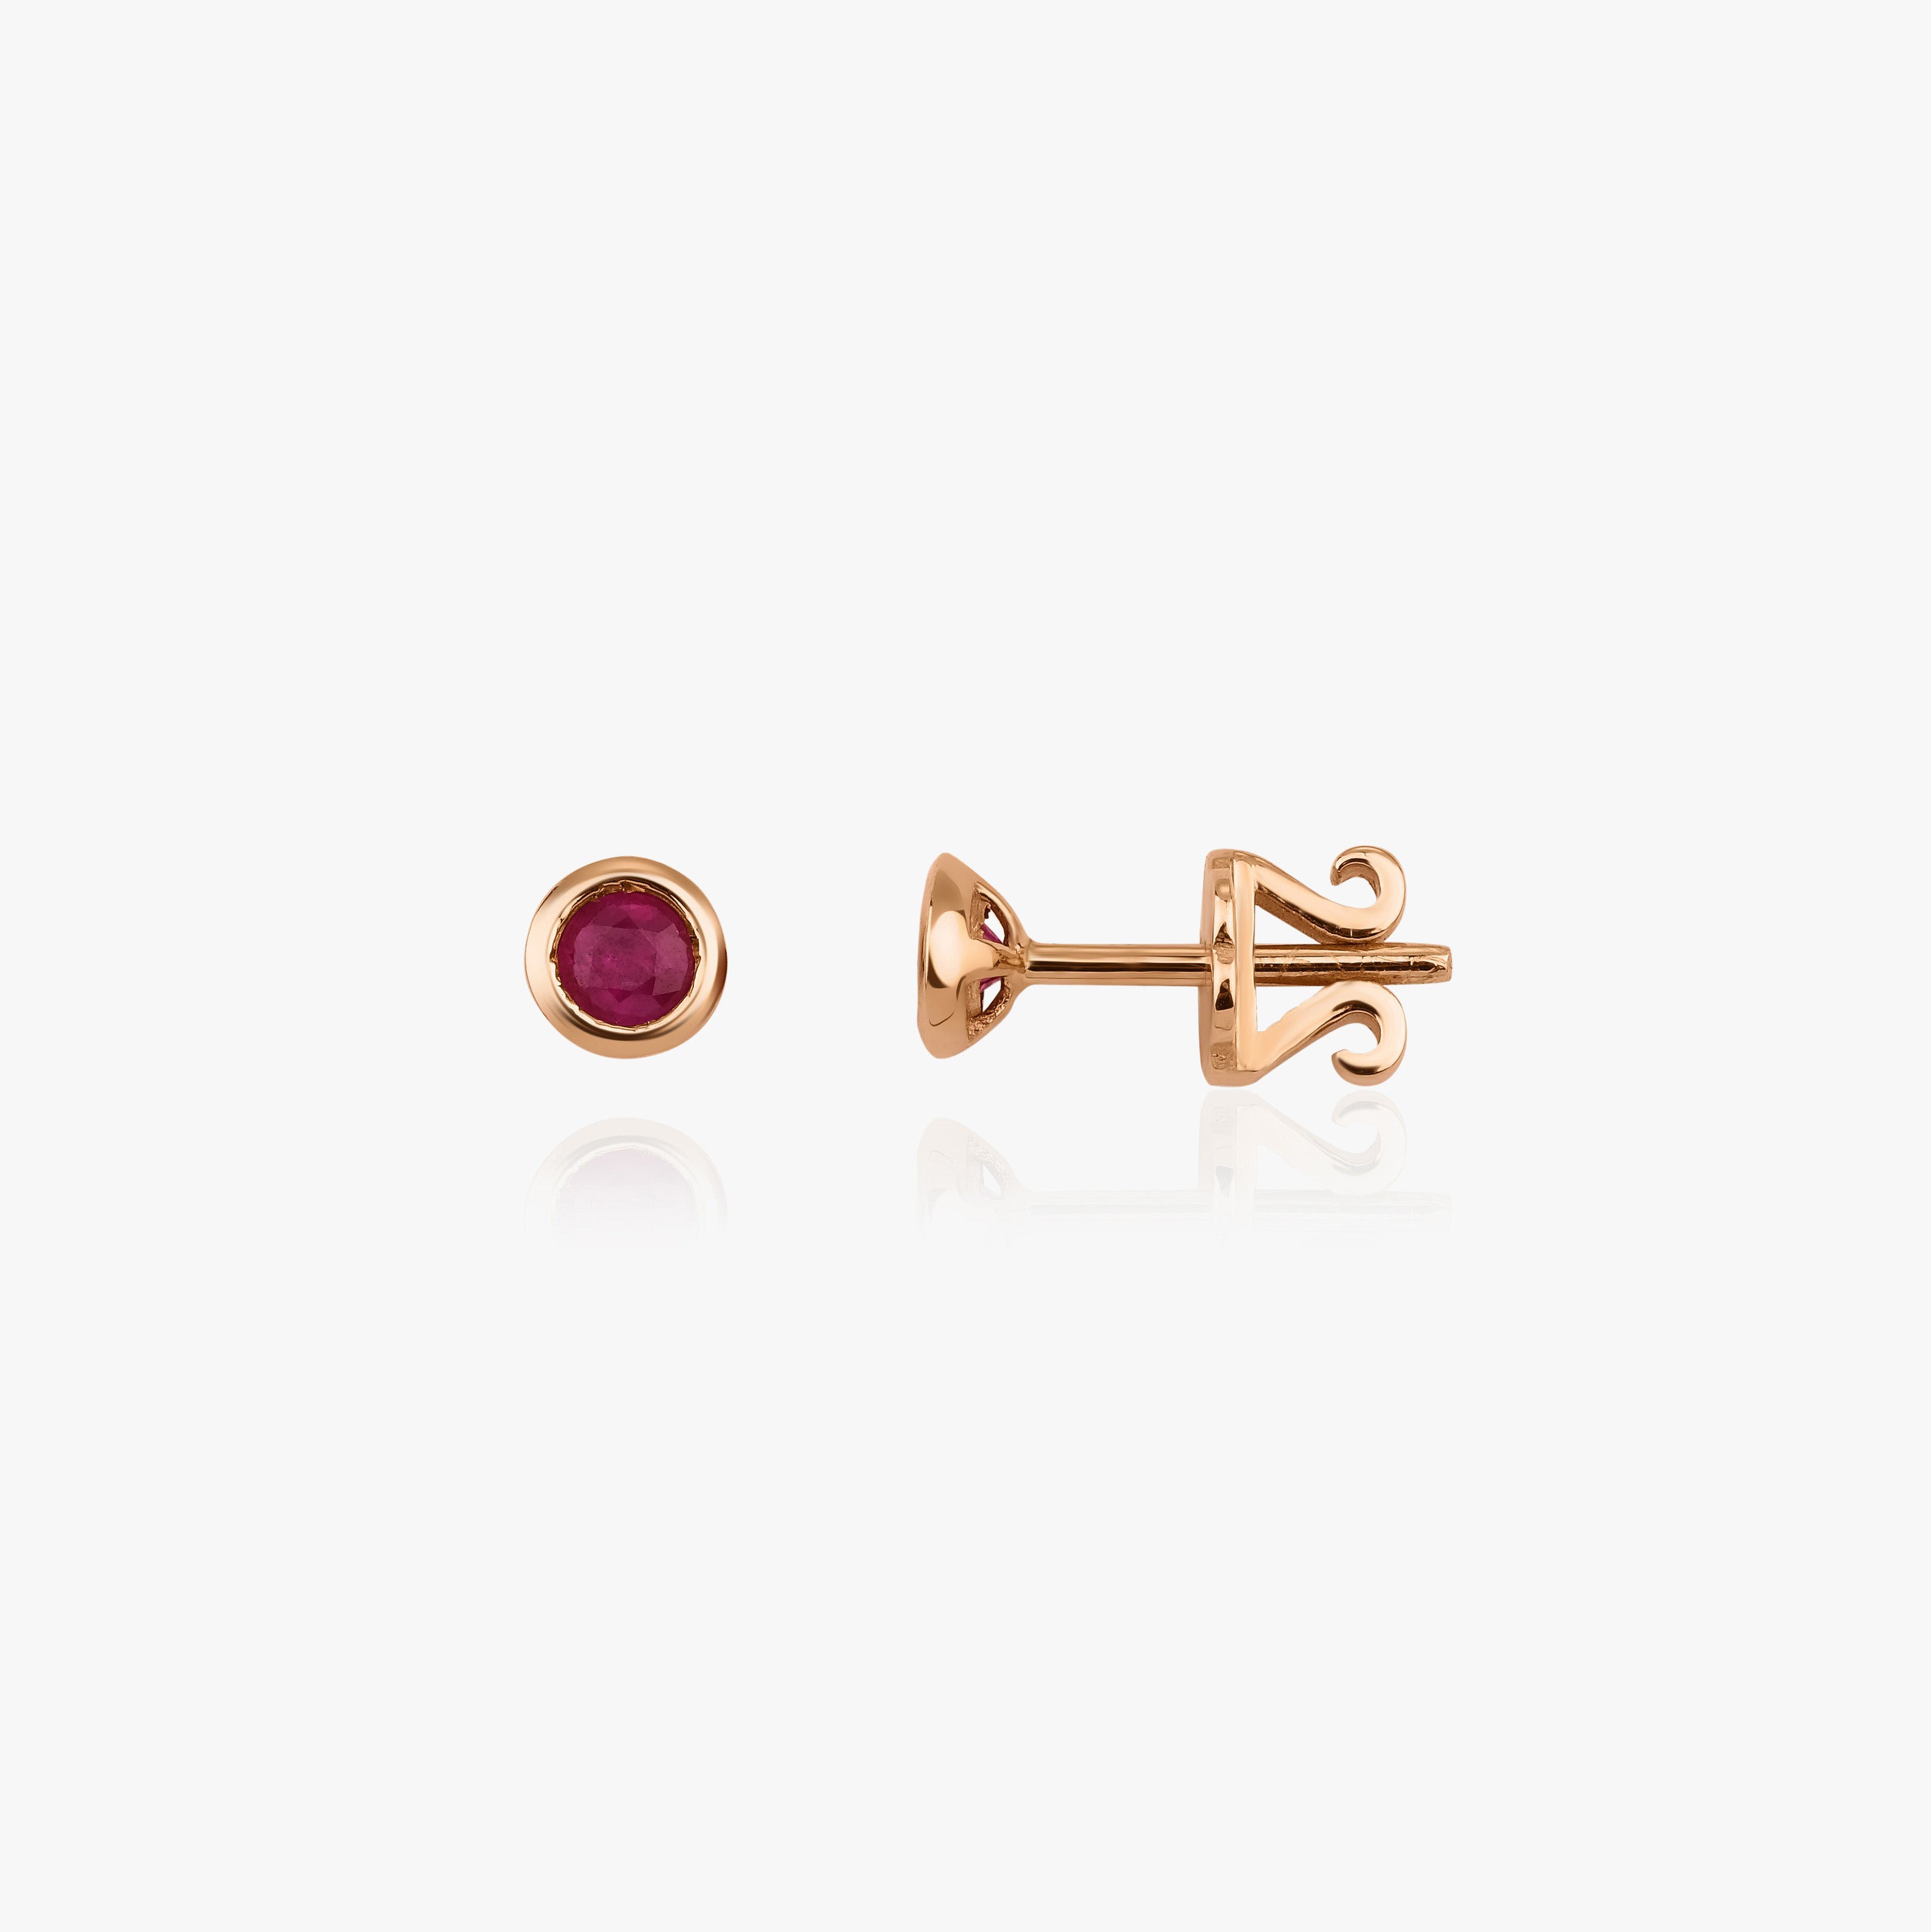 Natural Ruby Stud Earrings Available in 14K and 18K Gold